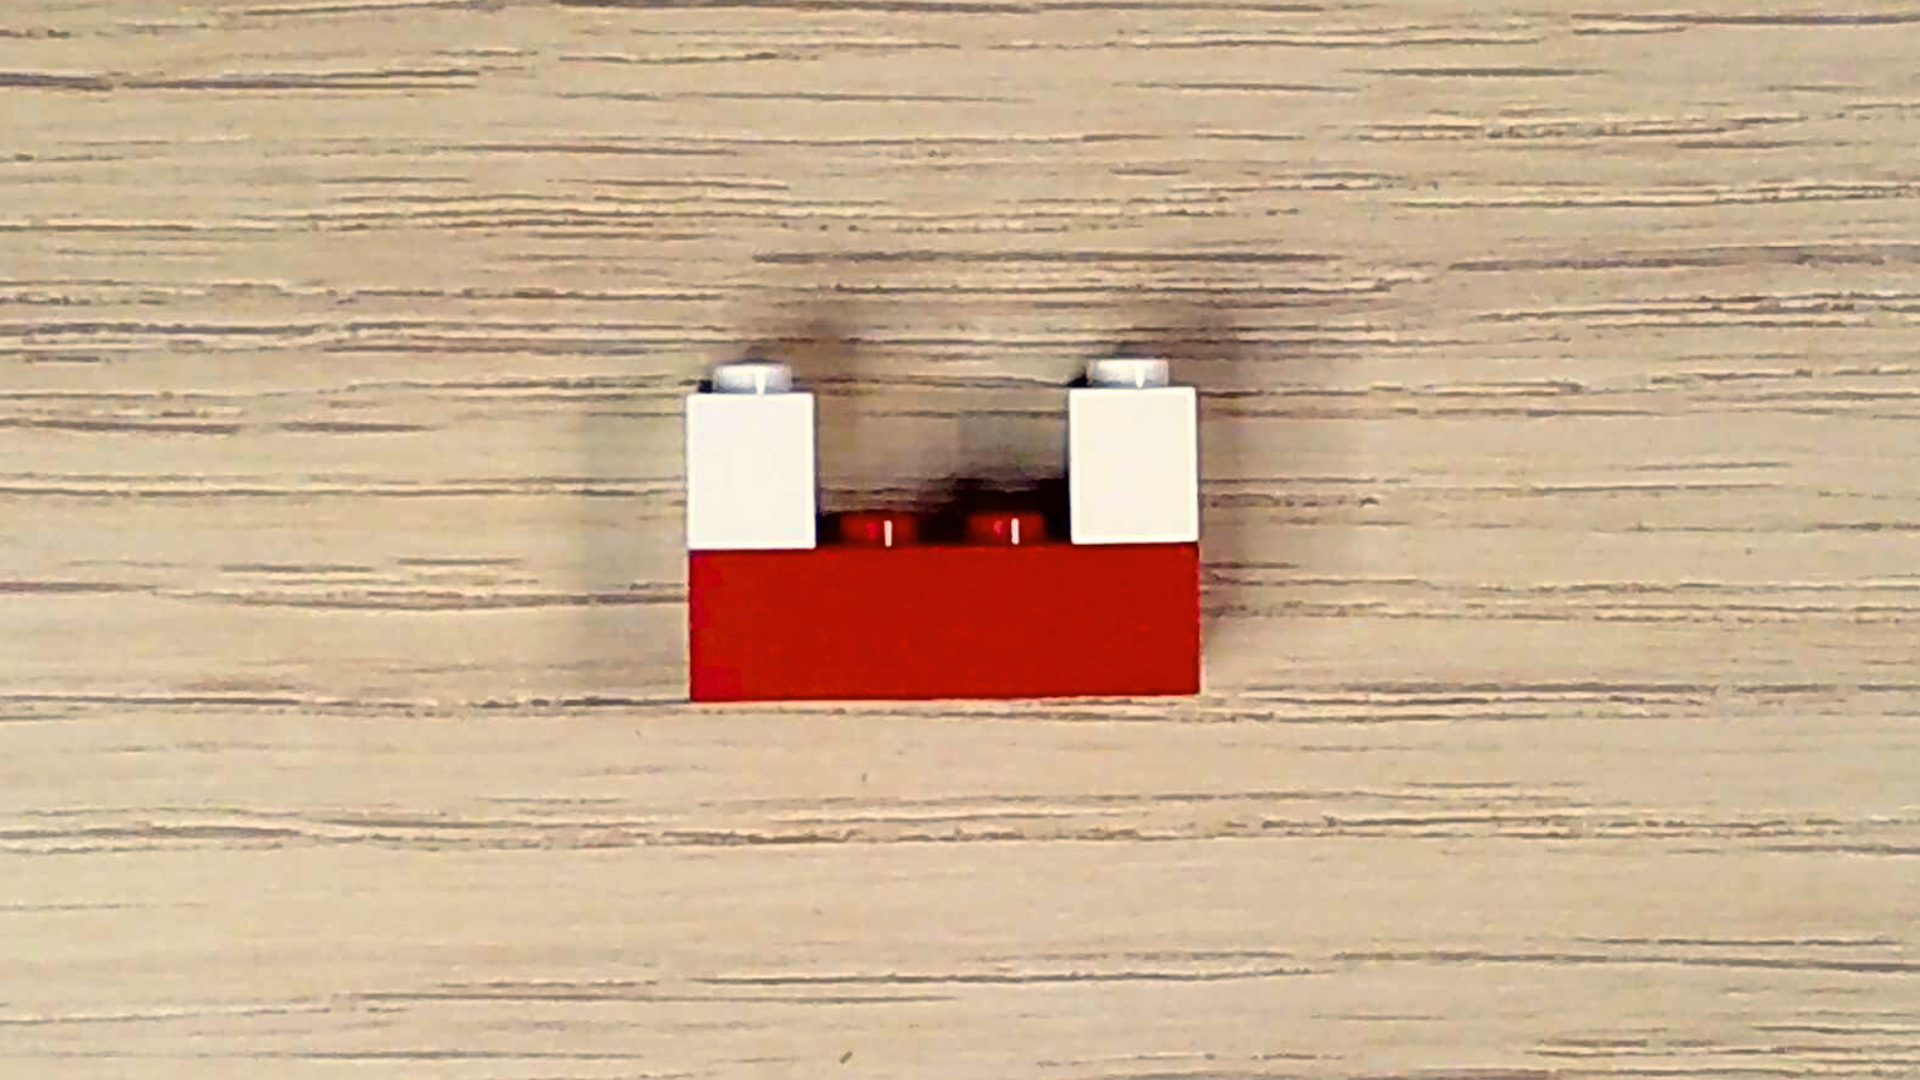 A red 2x4 plastic brick with two white 1x2 bricks attached in a U formation.